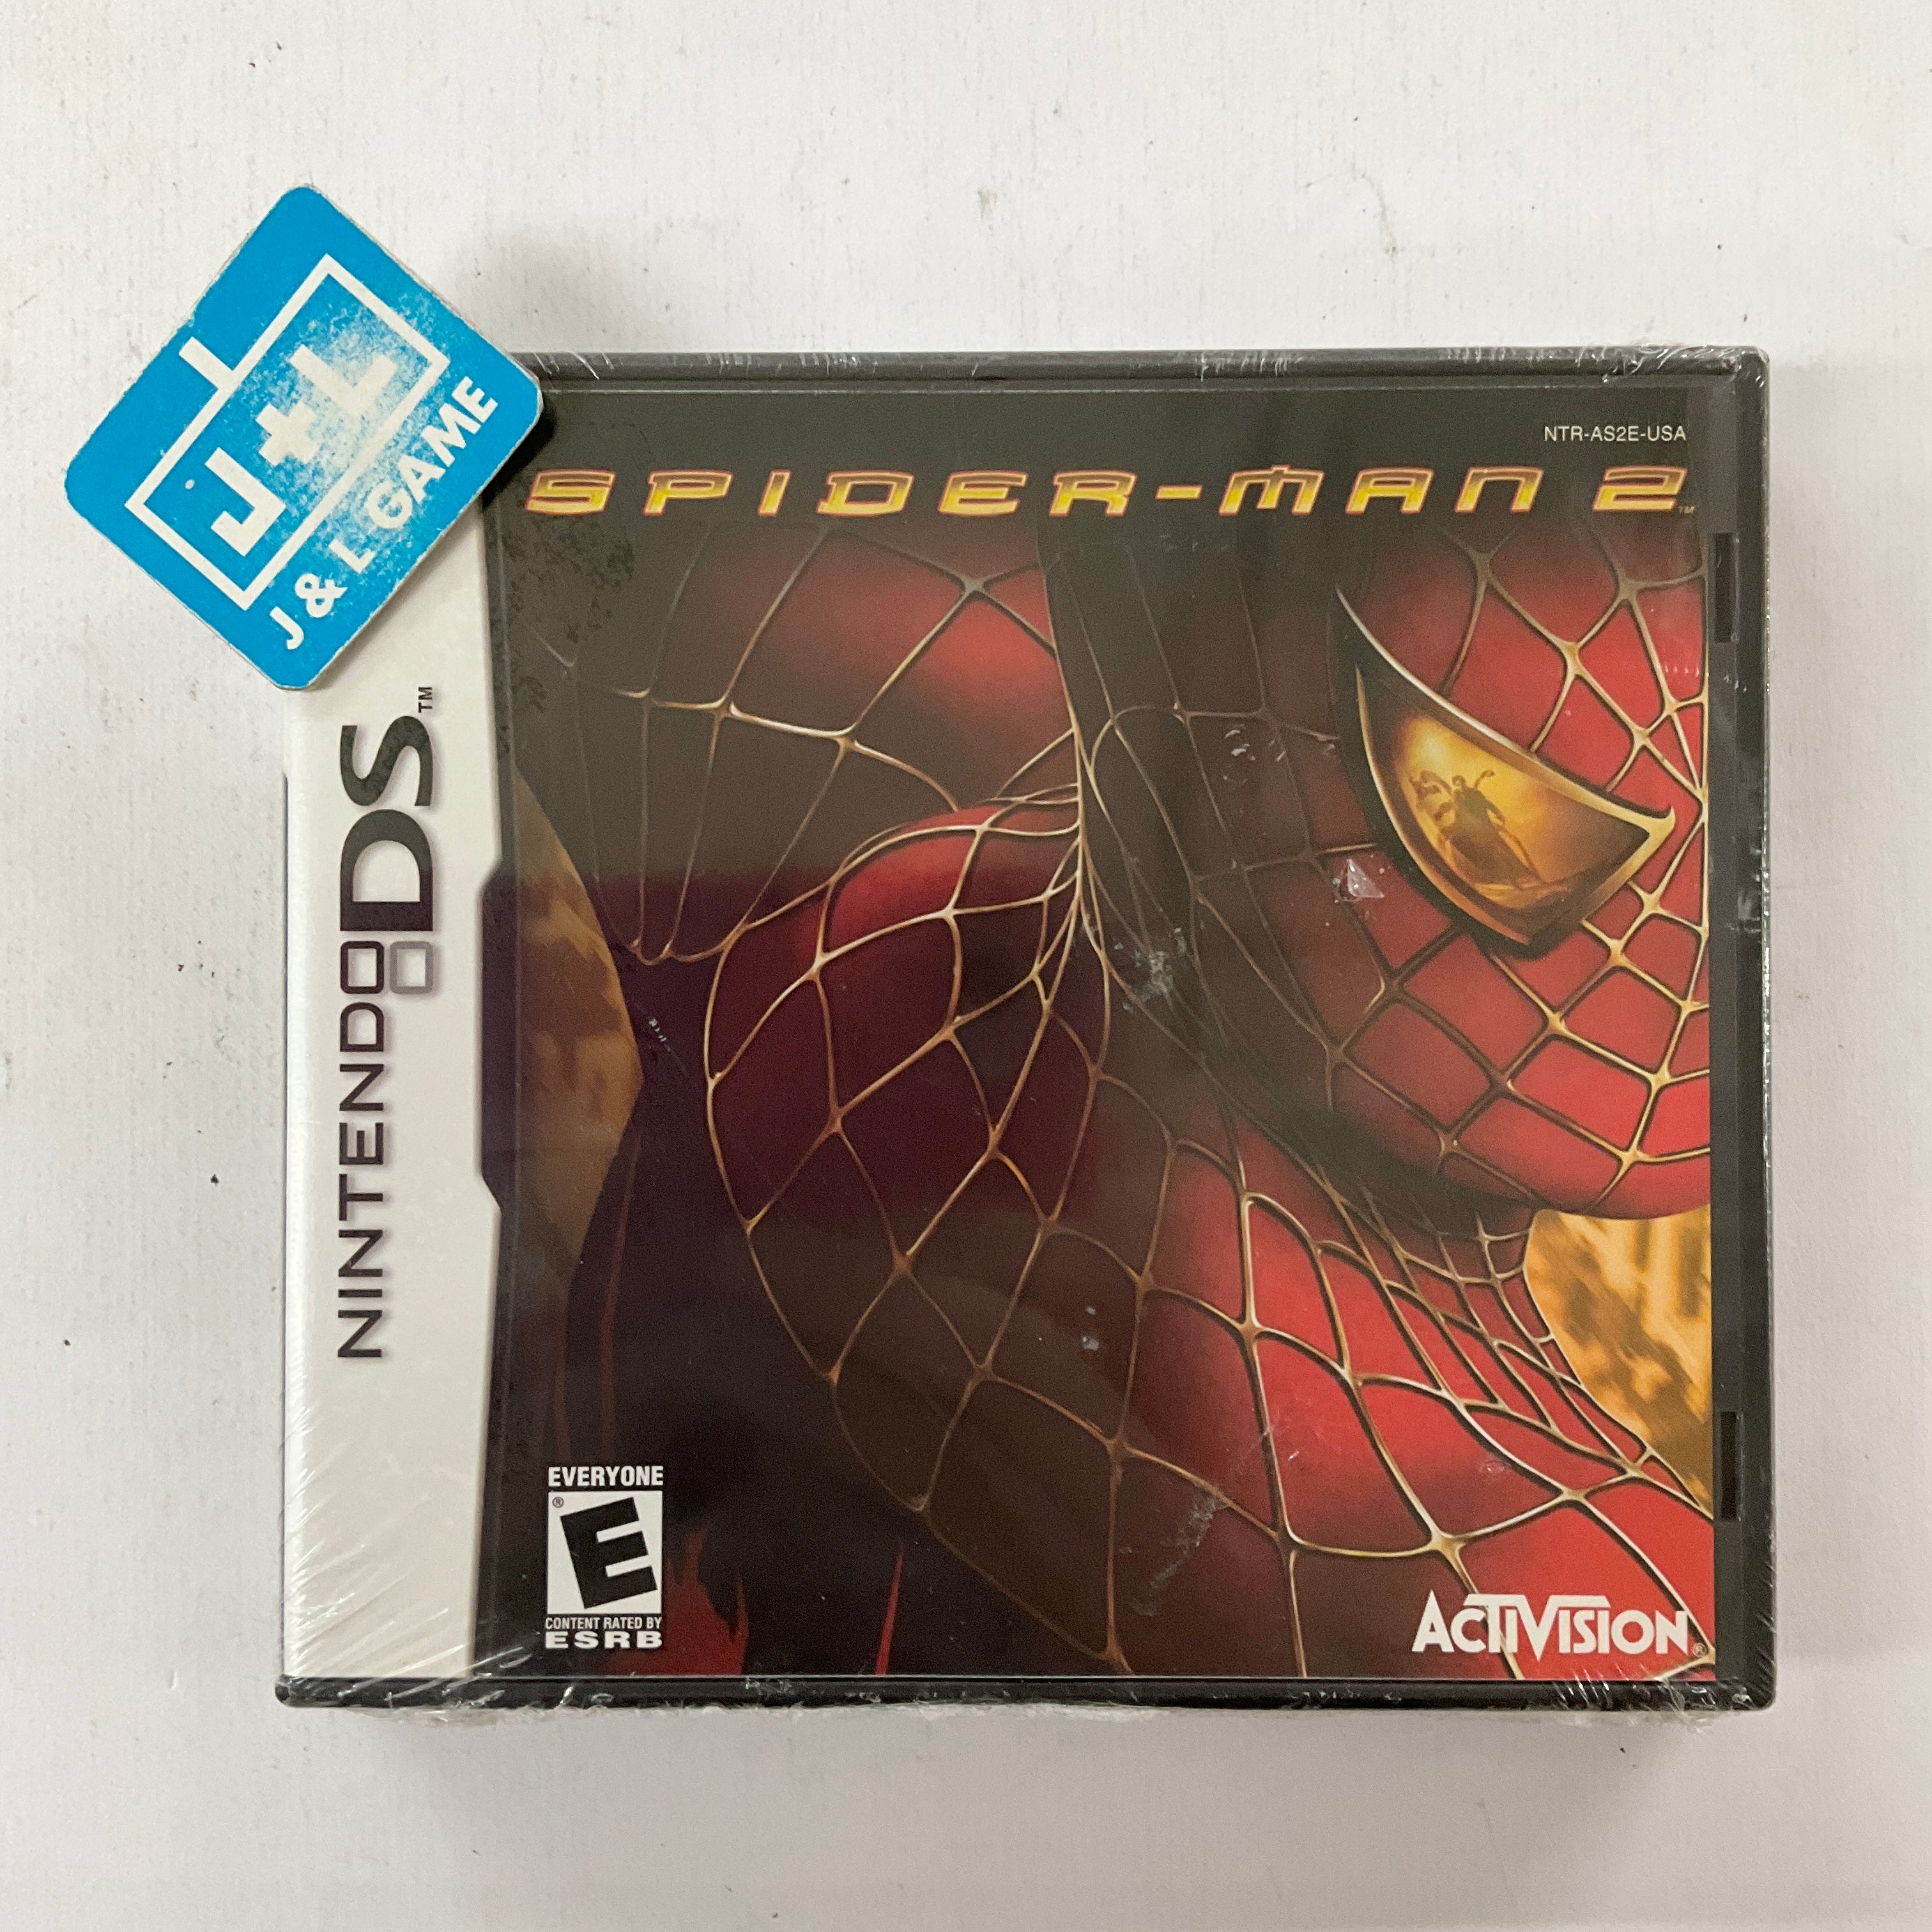 Spider-Man 2 - (NDS) Nintendo DS Video Games Activision   